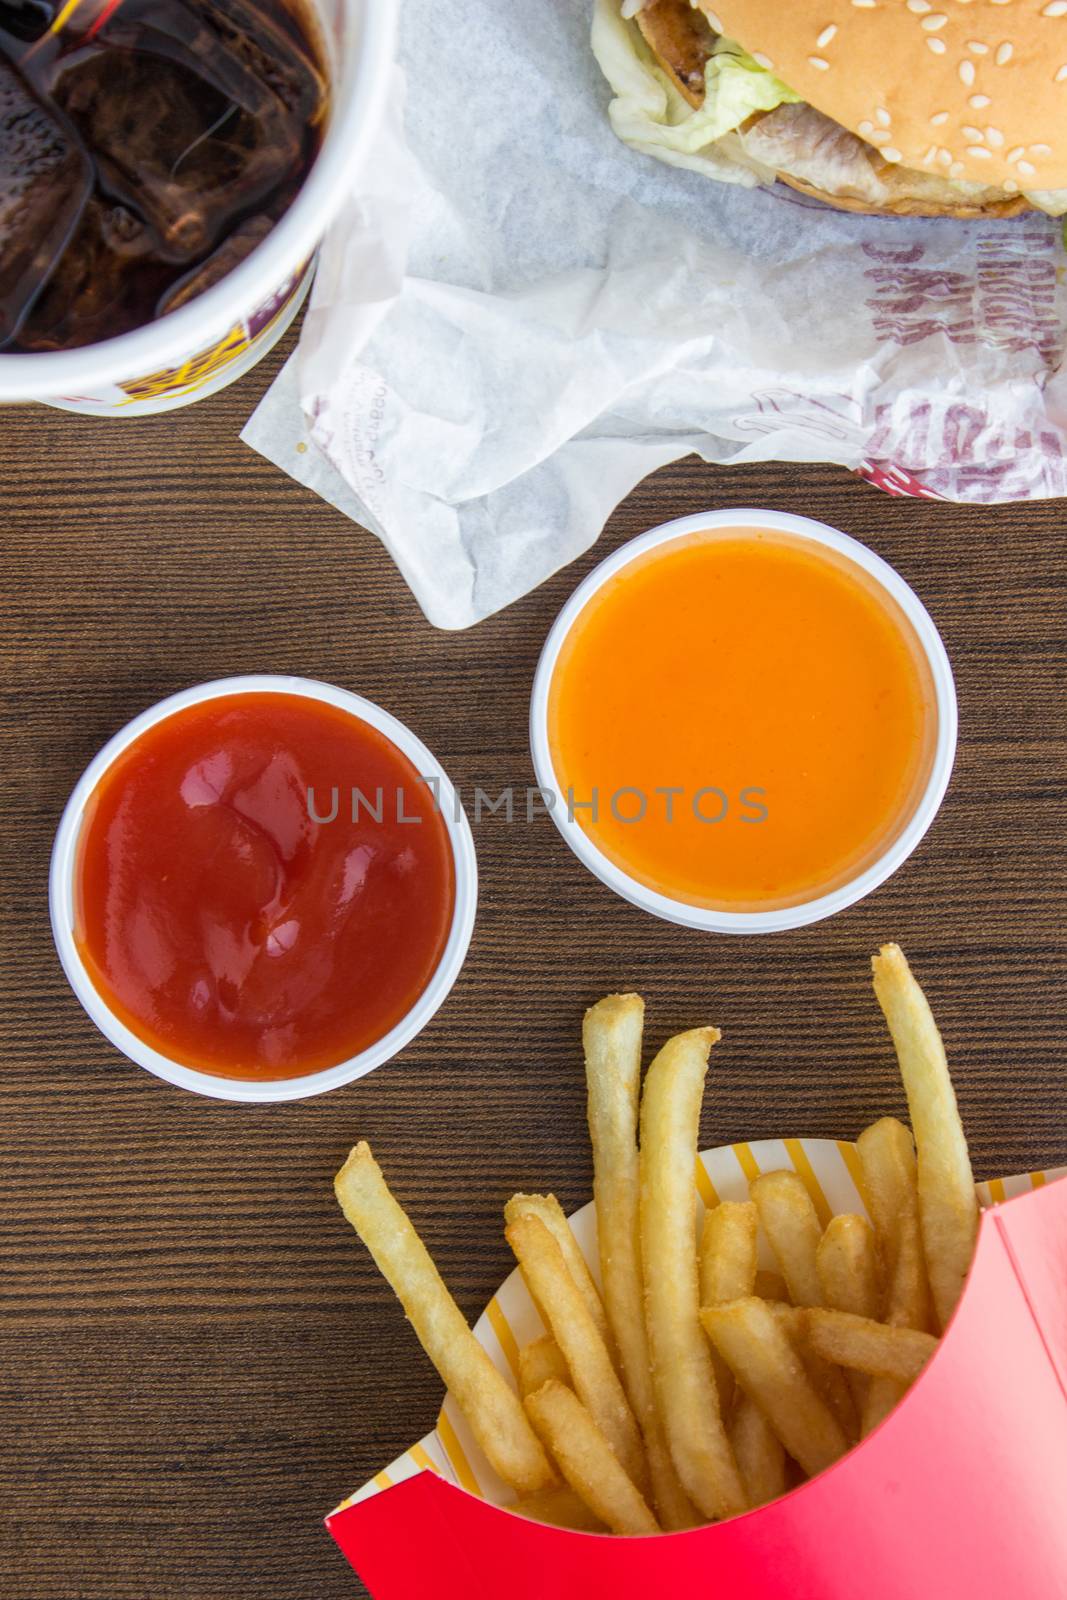 The eating fast food junk food on wood background